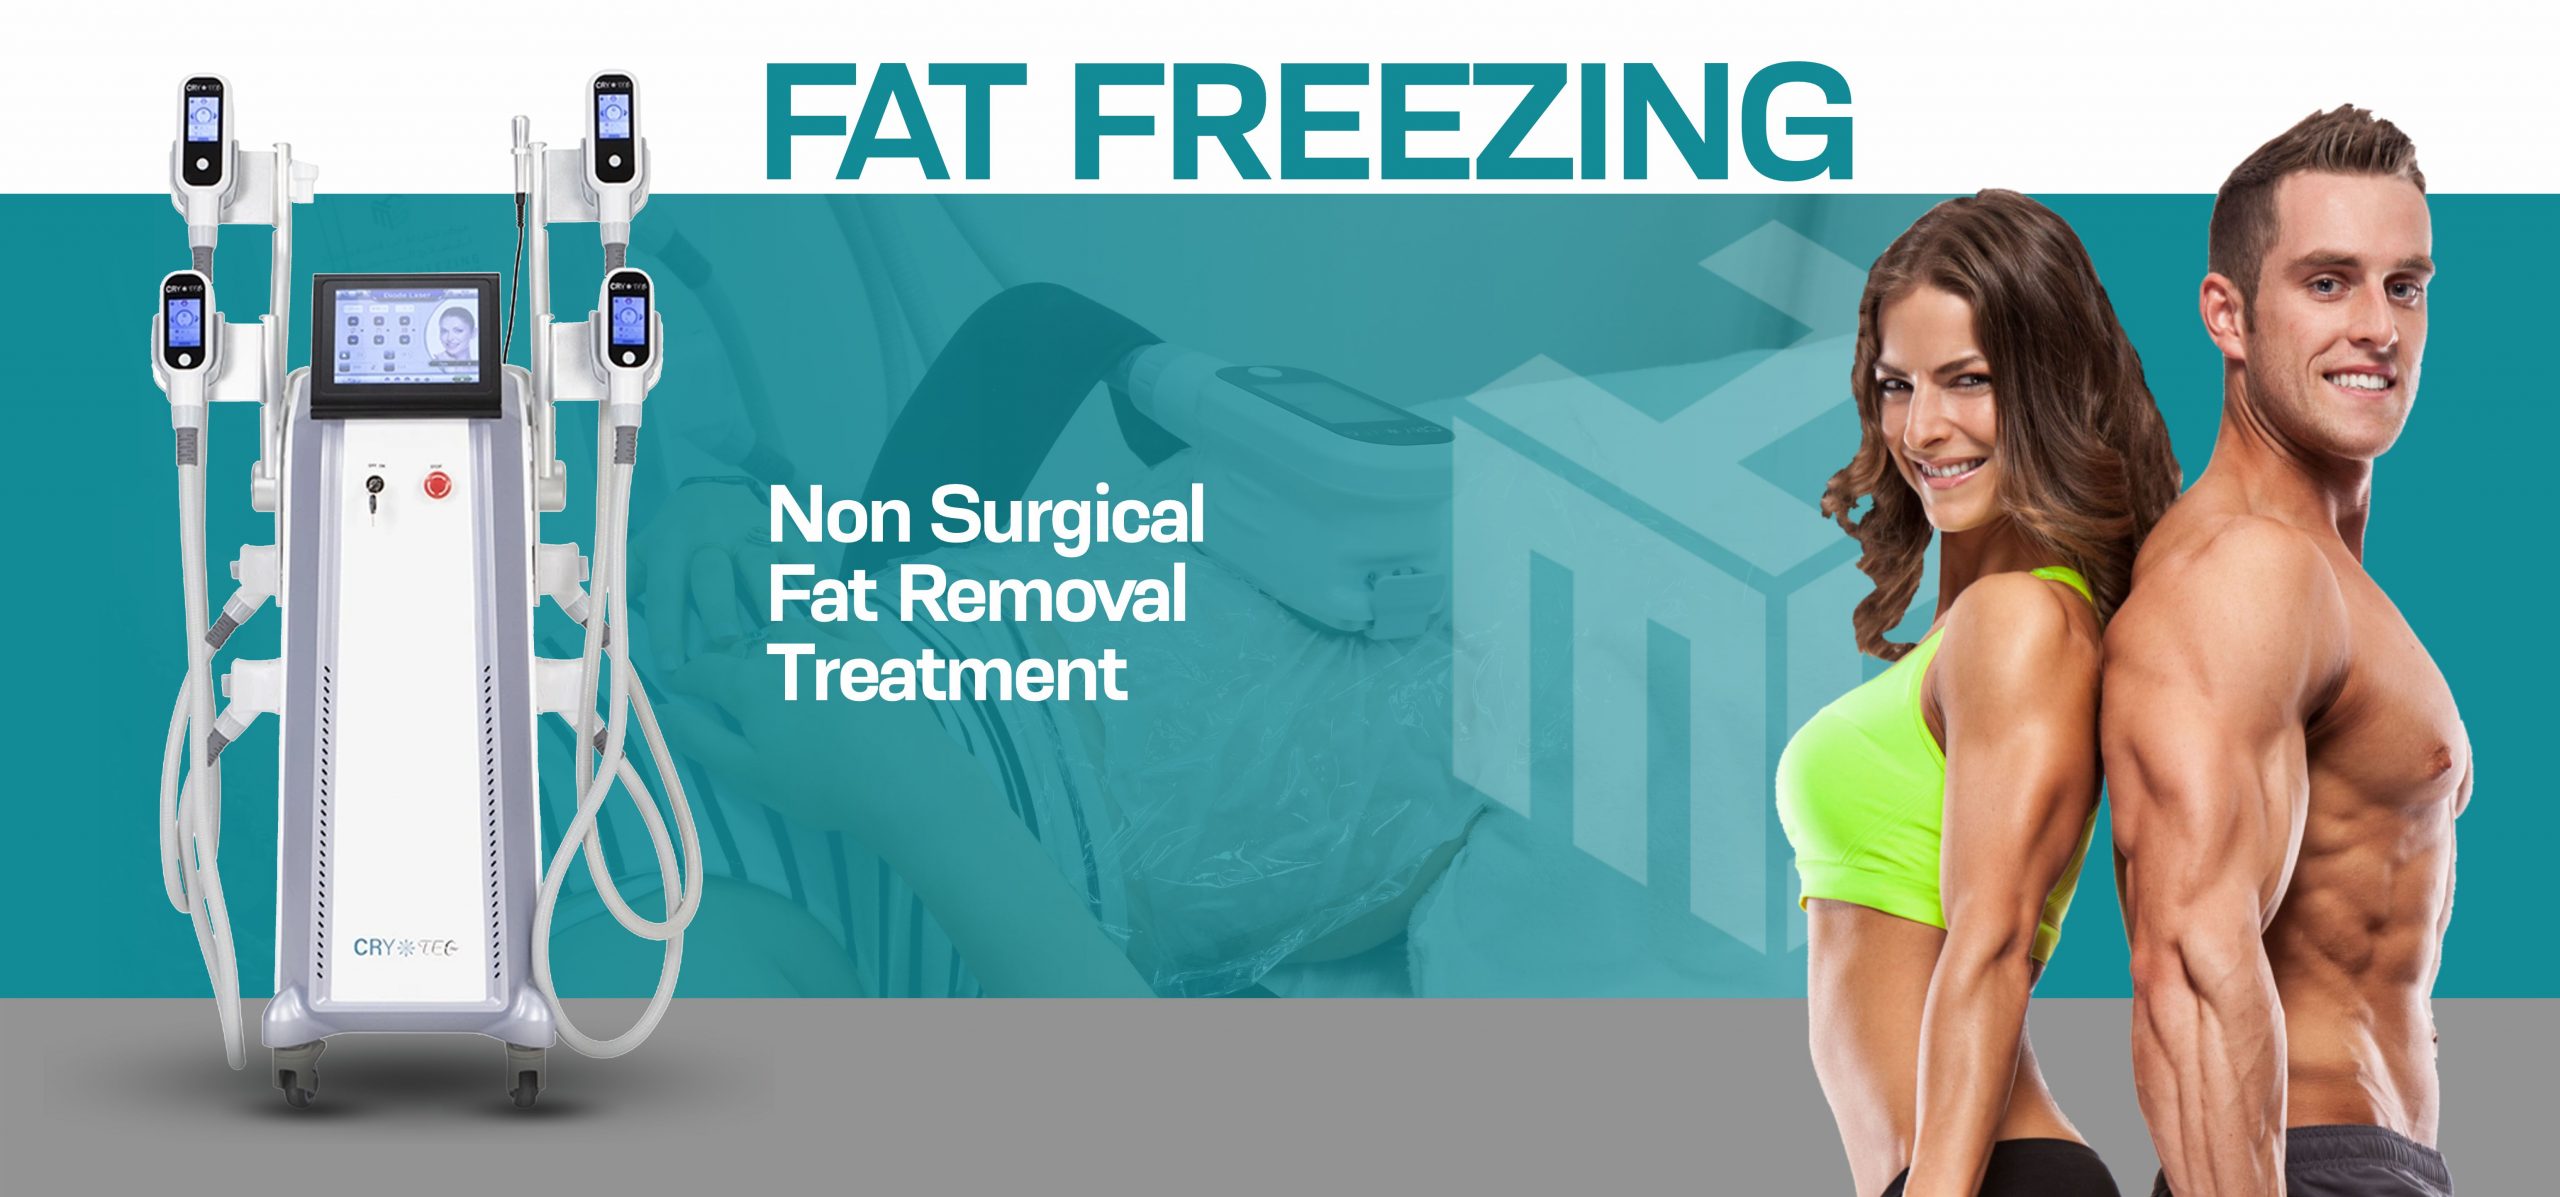 Fat freeing - coolsculpting